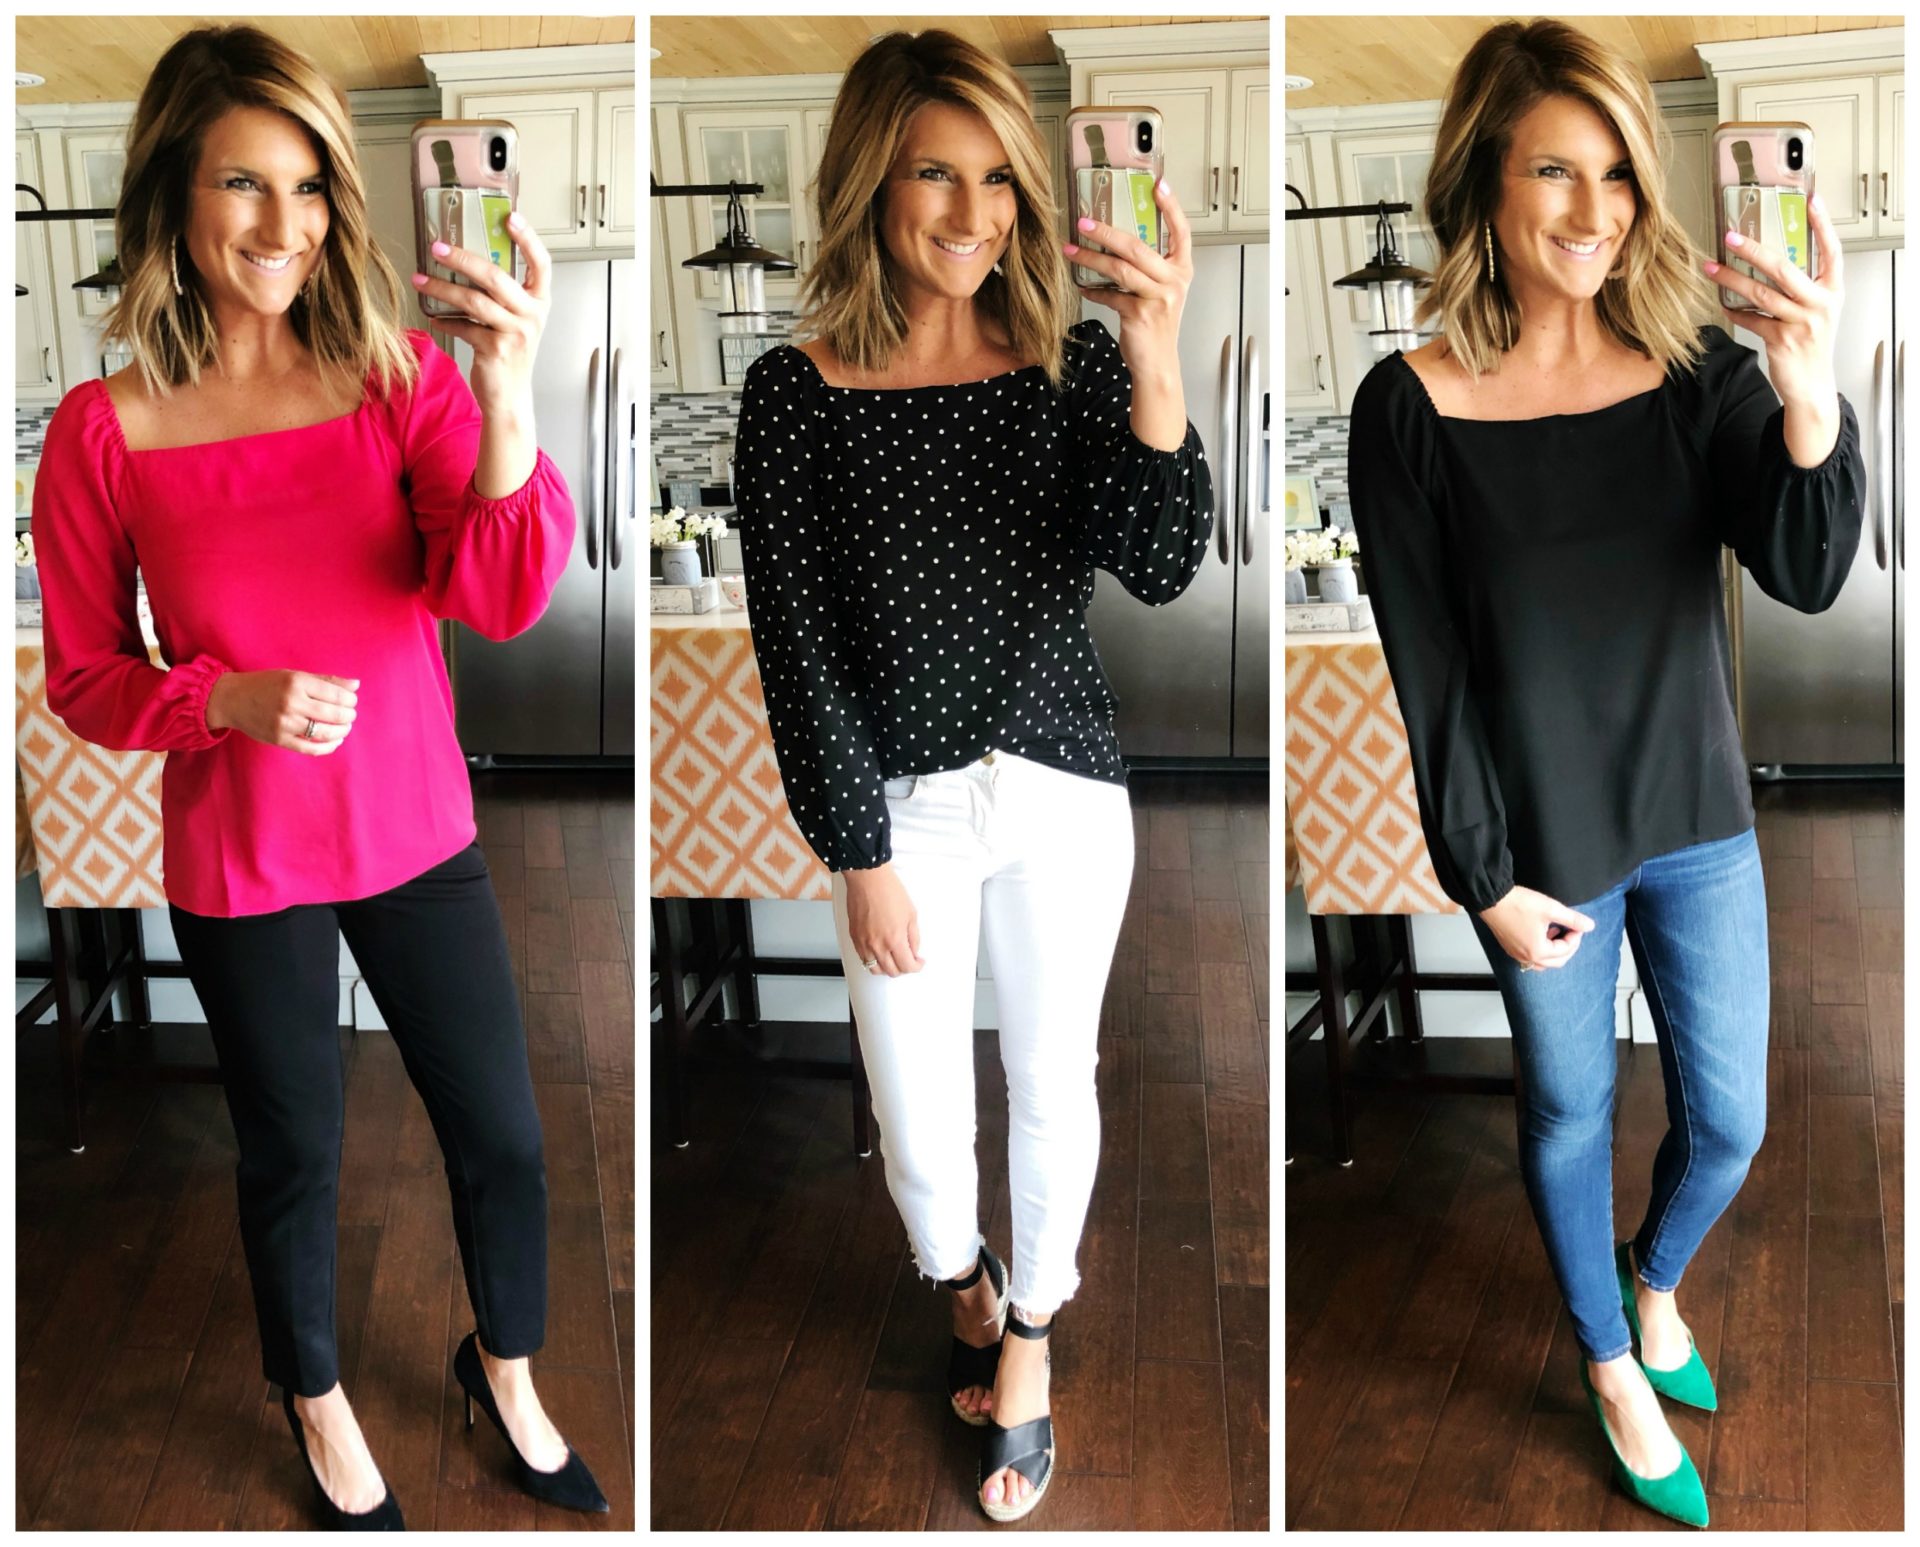 Versatile Top for Work and Date Night // Three Different Ways to Style a Top // Comfortable Heels for Work